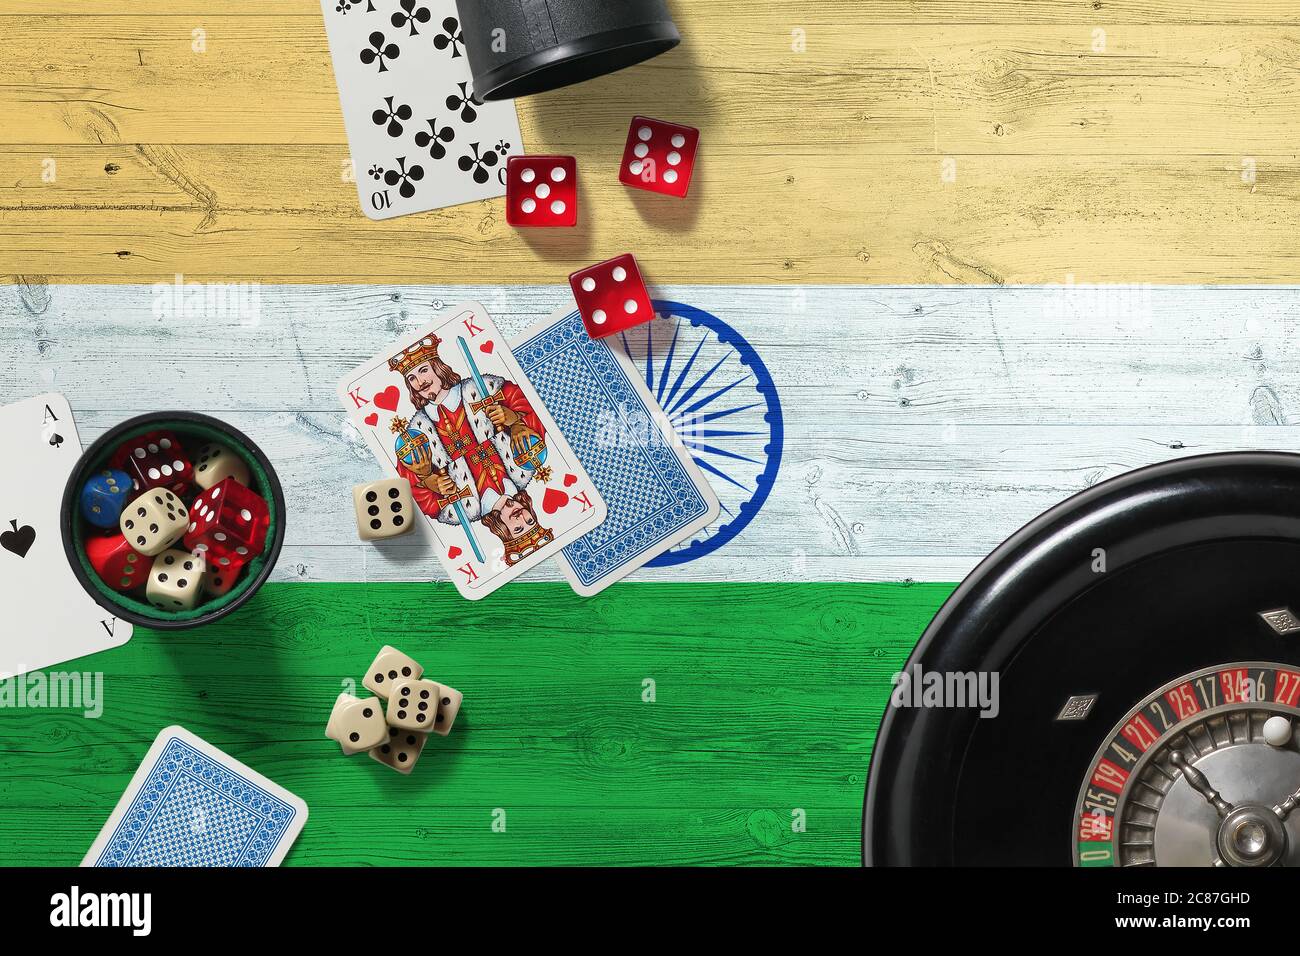 Play roulette online